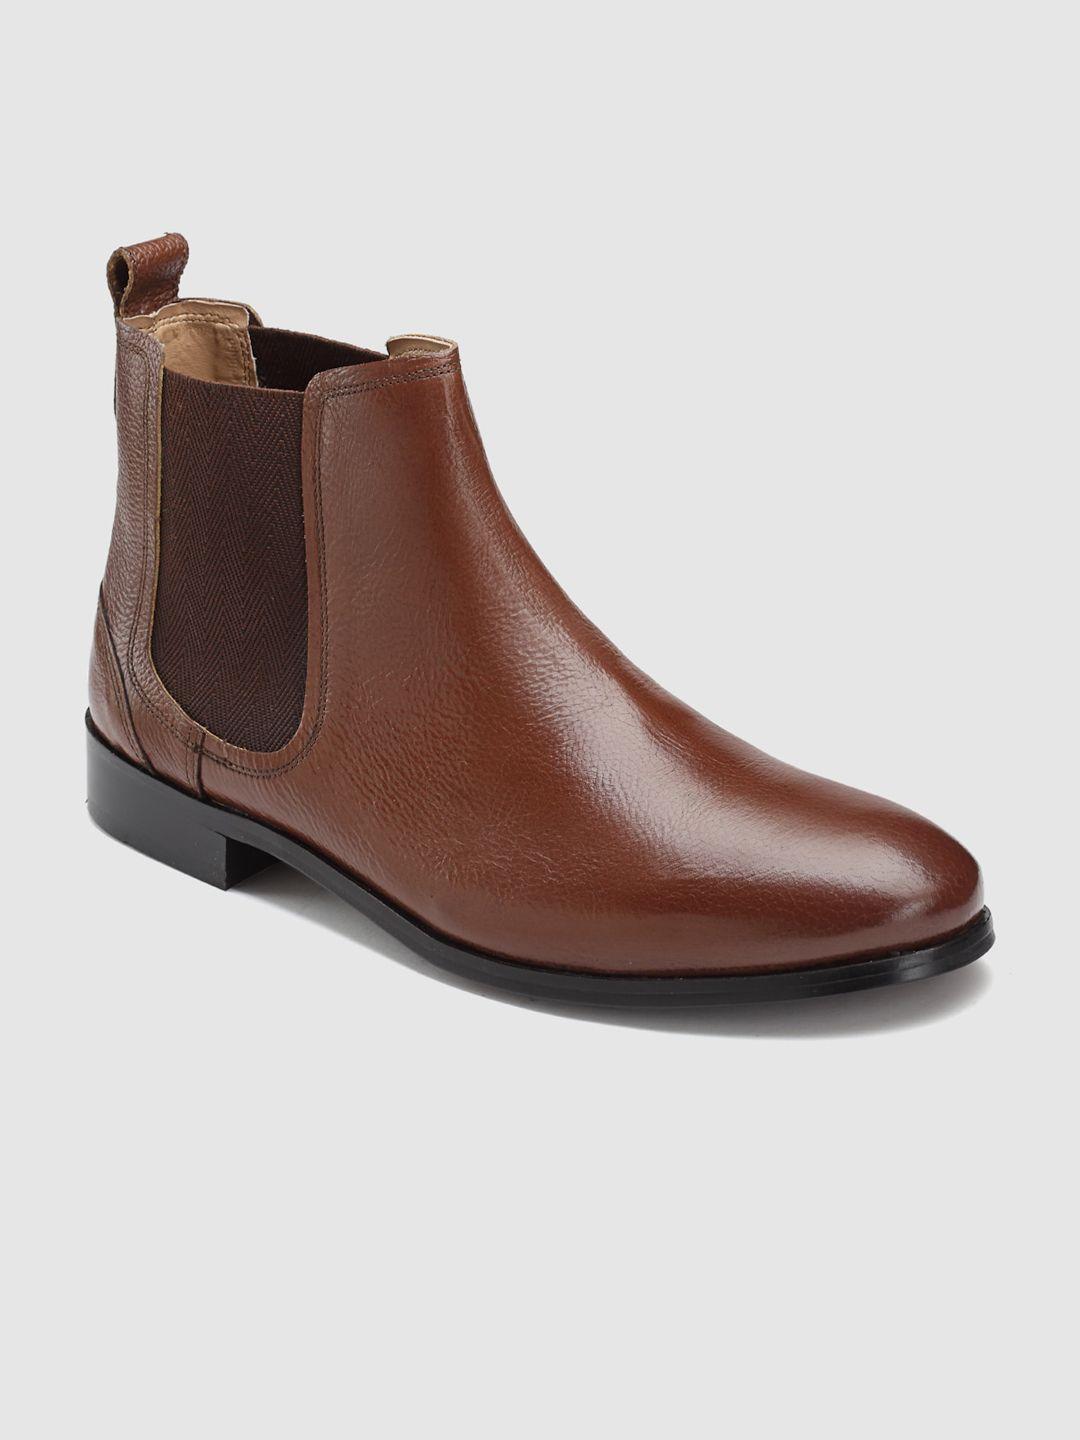 hats-off-accessories-men-mid-top-leather-chelsea-boots